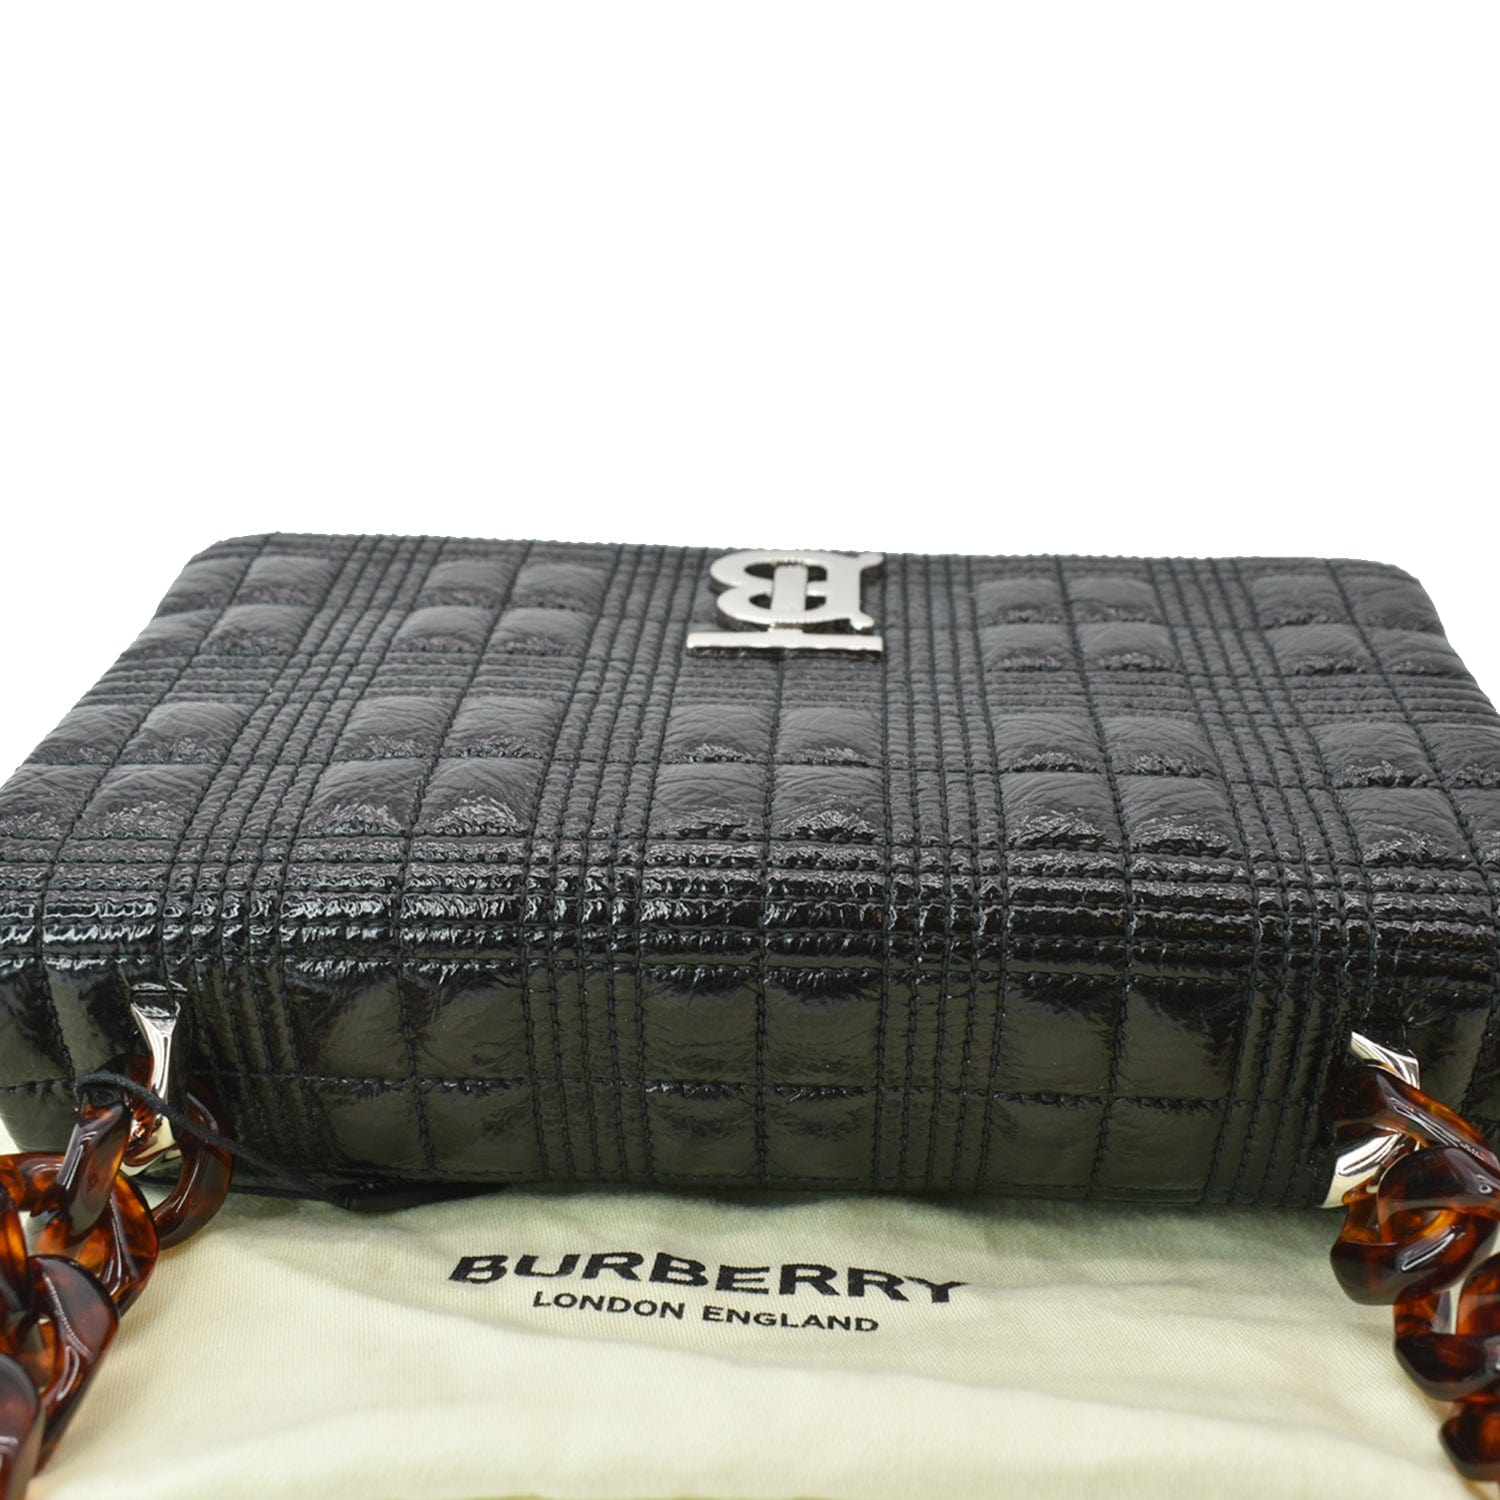 Burberry Mini Quilted Leather Shoulder Bag